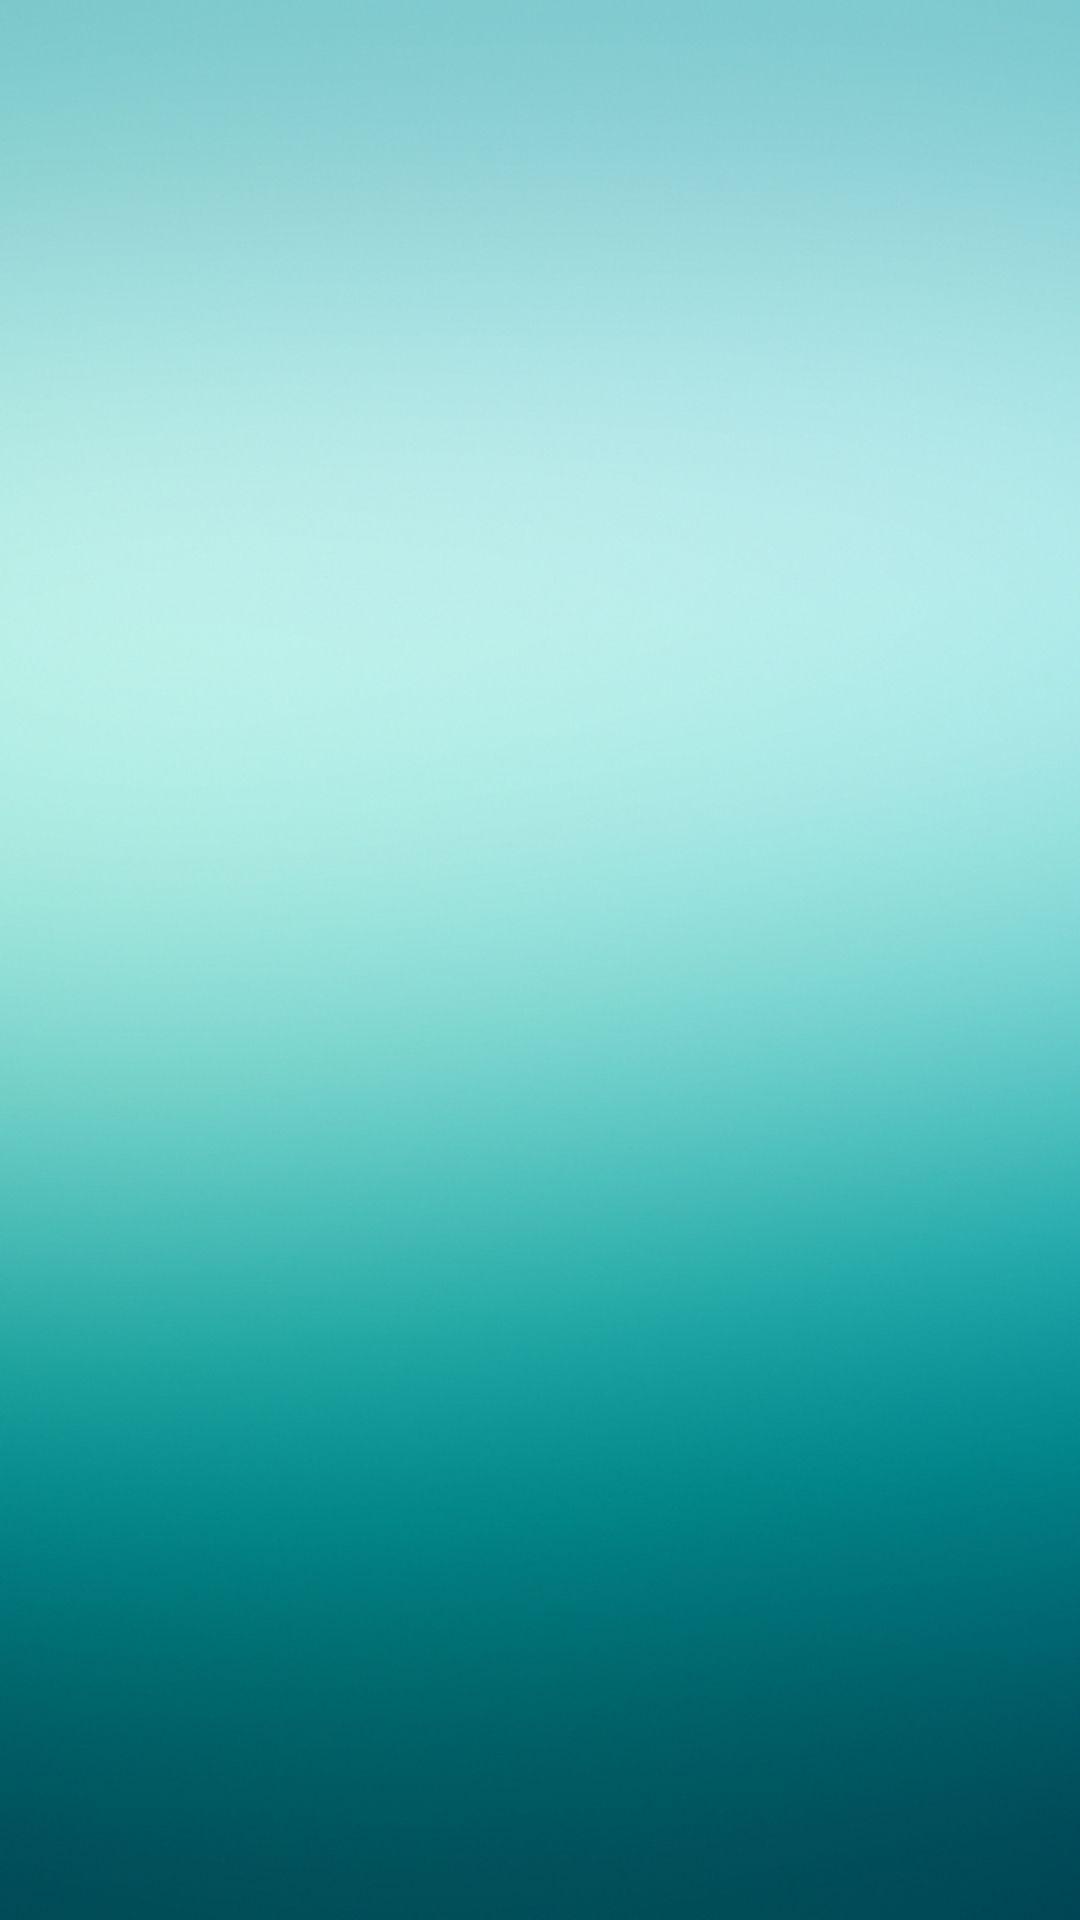 Turquoise Wallpapers - Wallpaper Cave
